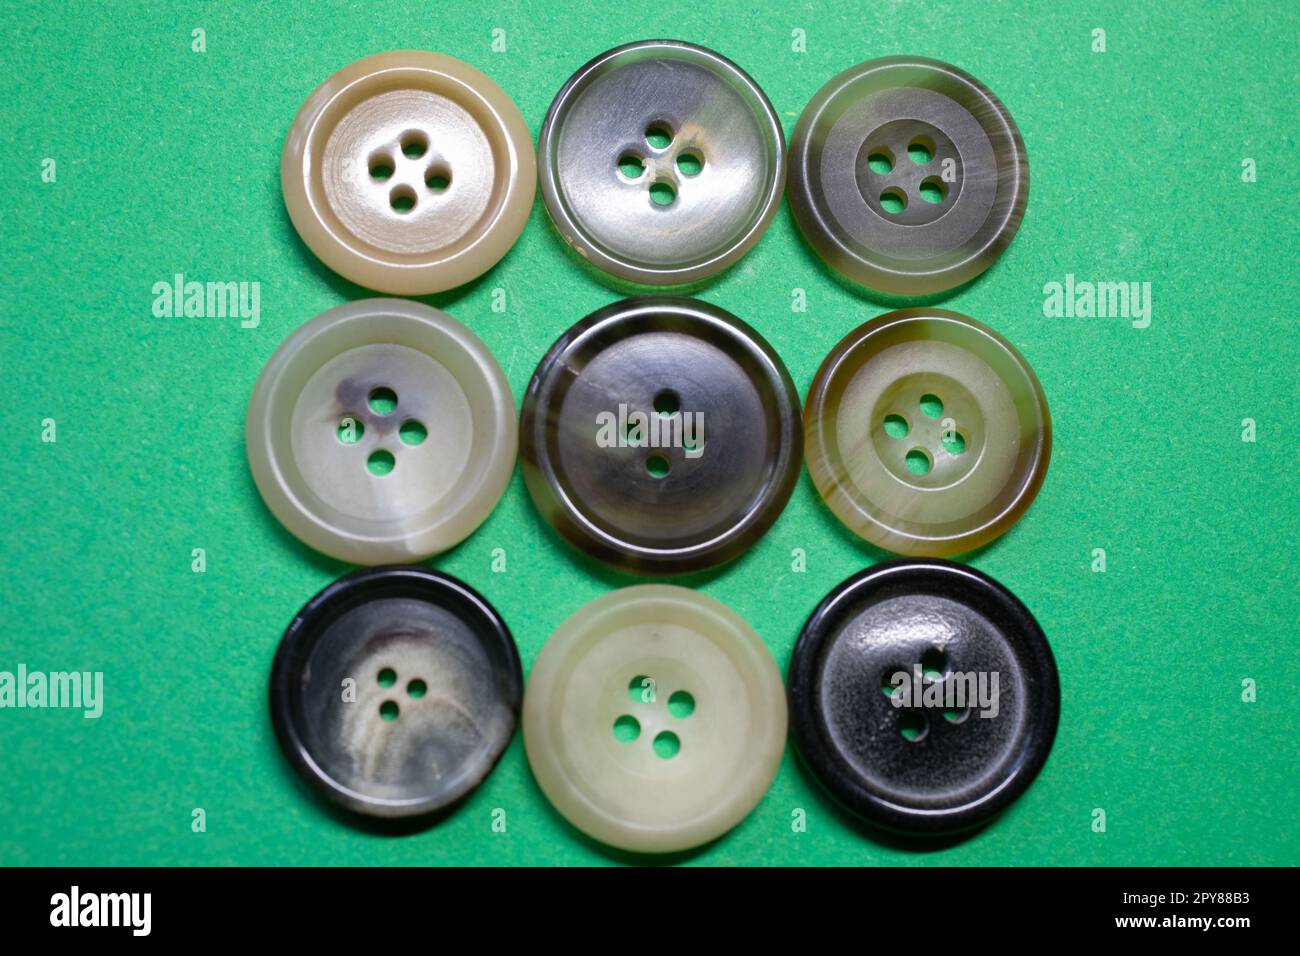 a large number of buttons Stock Photo